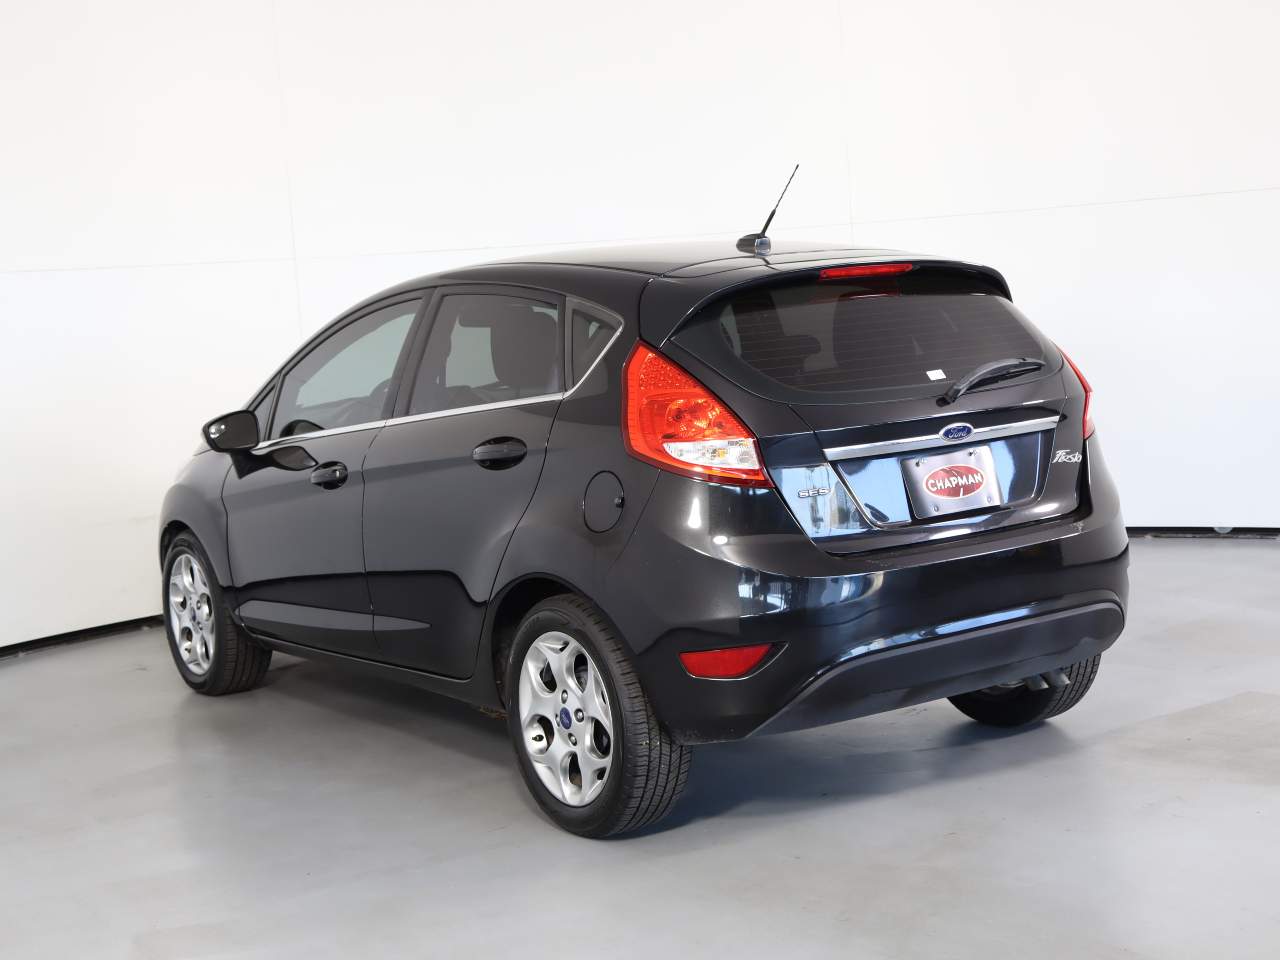 Used 2011 Ford Fiesta SES with VIN 3FADP4FJ8BM223929 for sale in Tucson, AZ